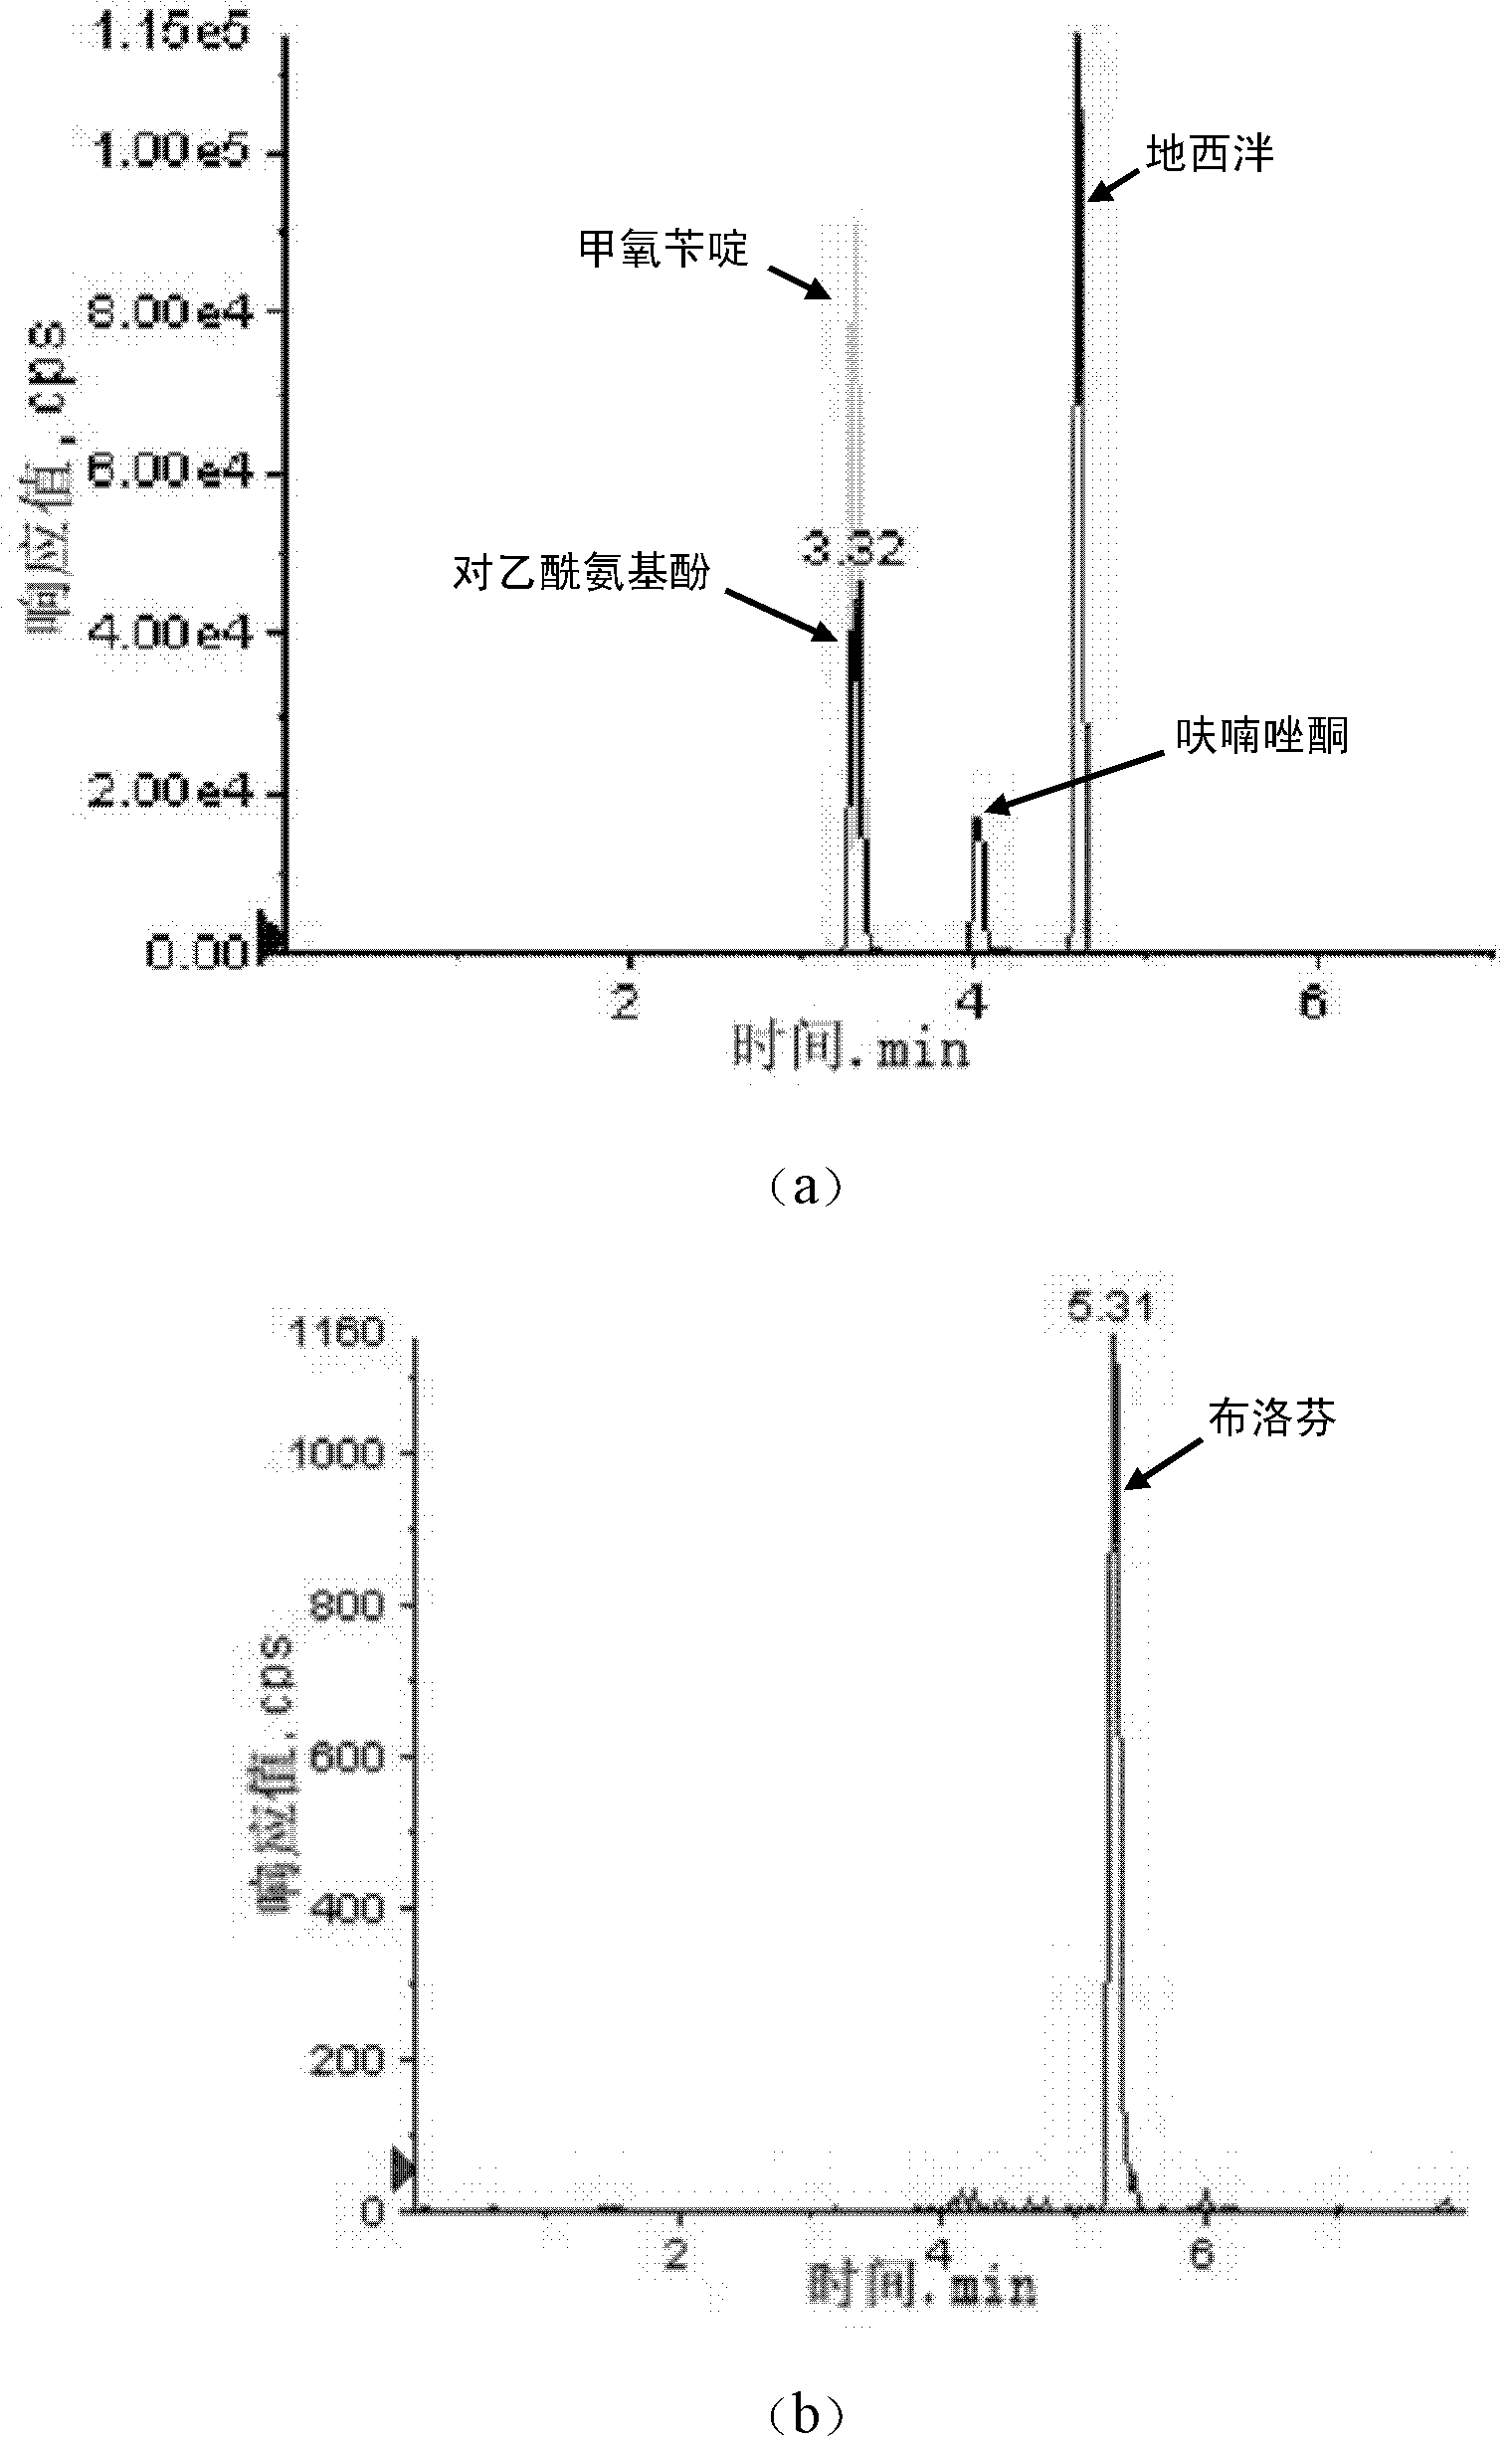 Method for simultaneously detecting five medicaments in water